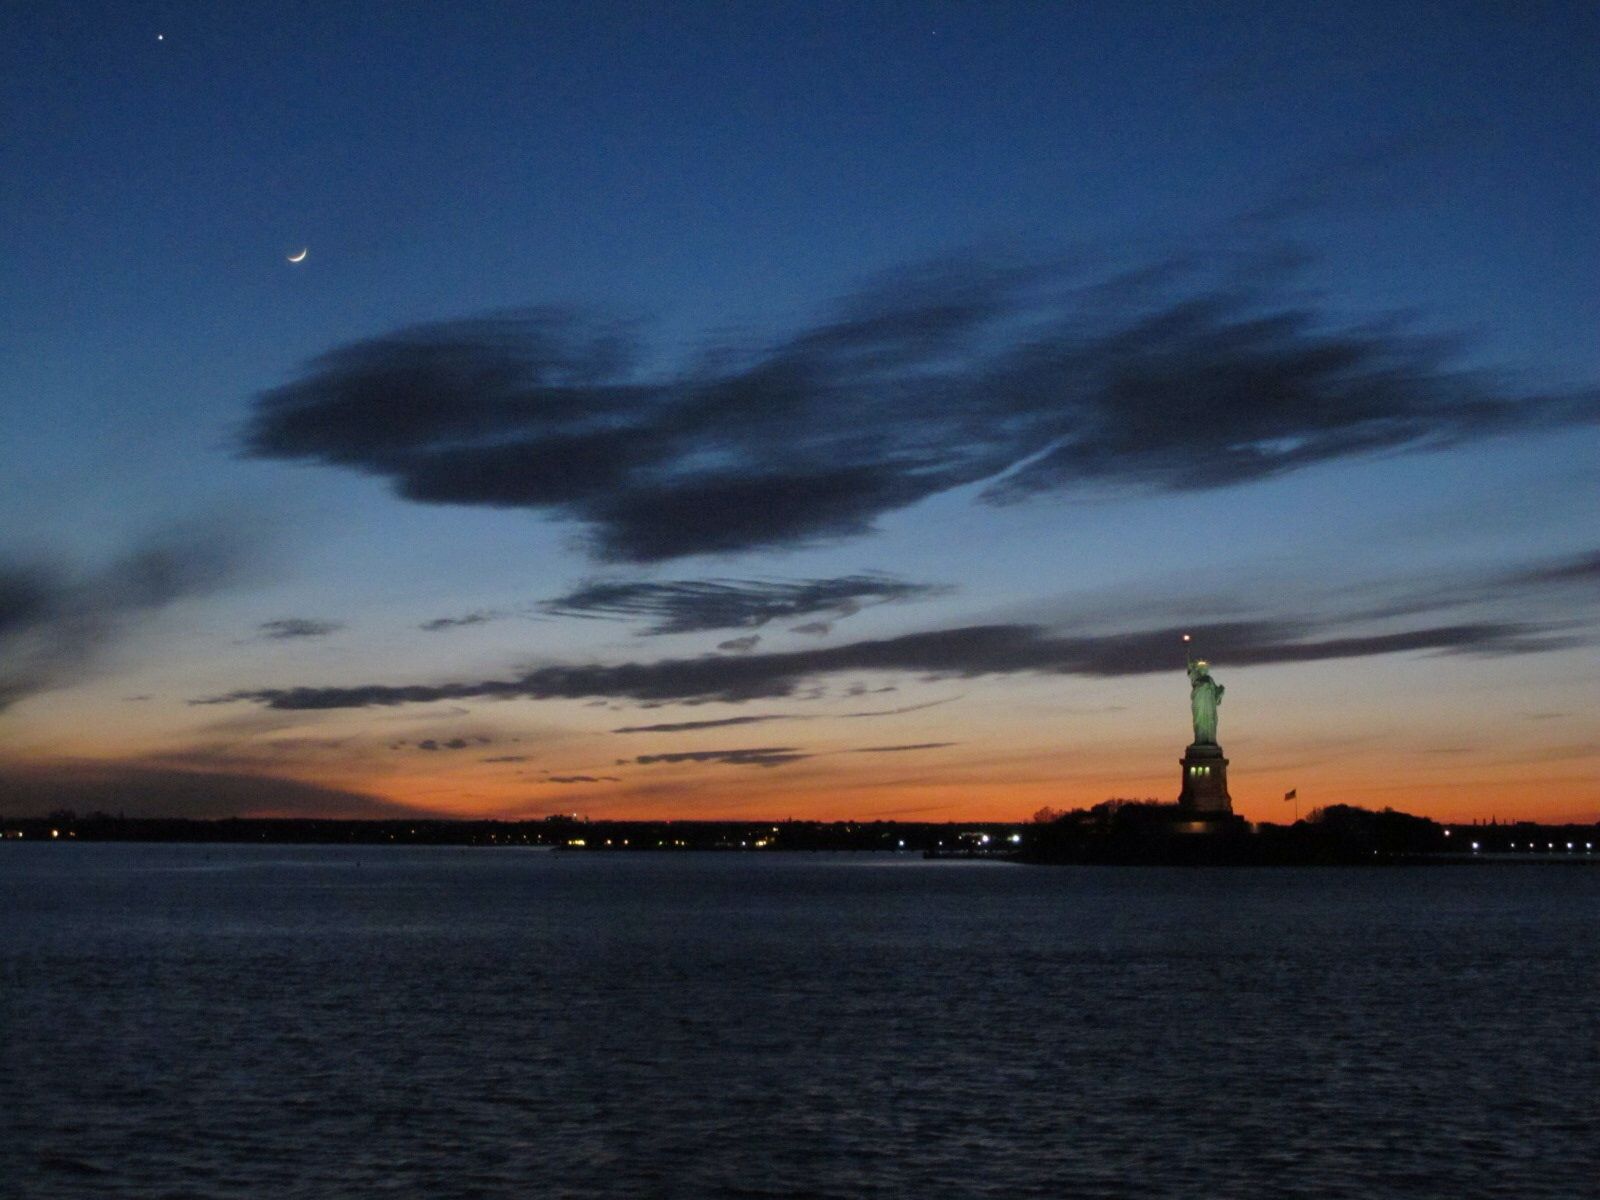 Statue of Liberty at Dusk - Sunset